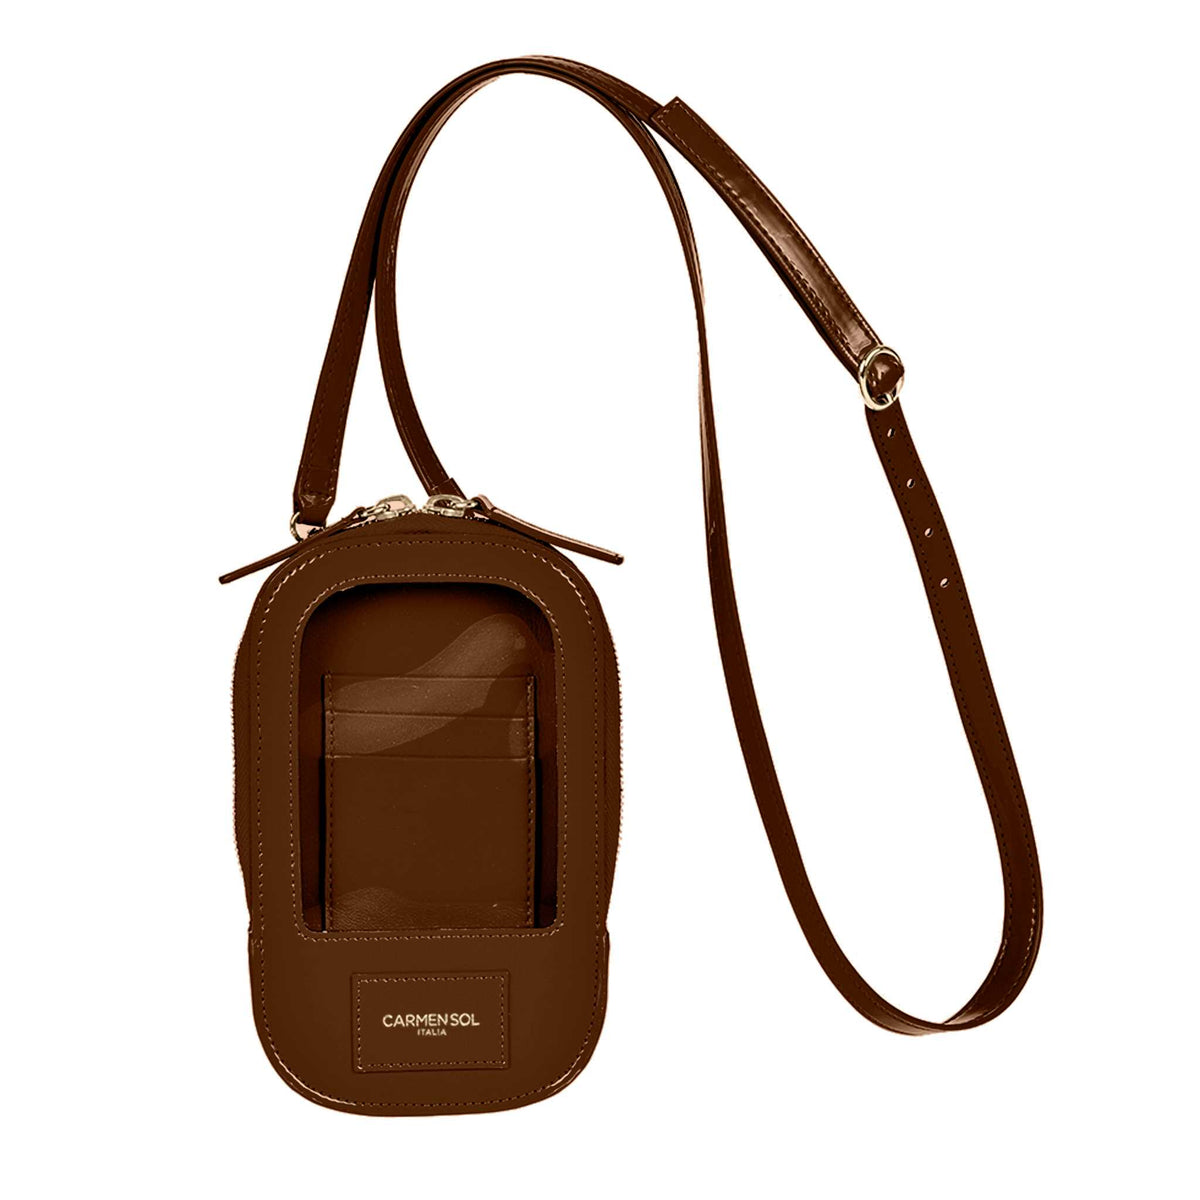 Gio smartphone holder in color brown